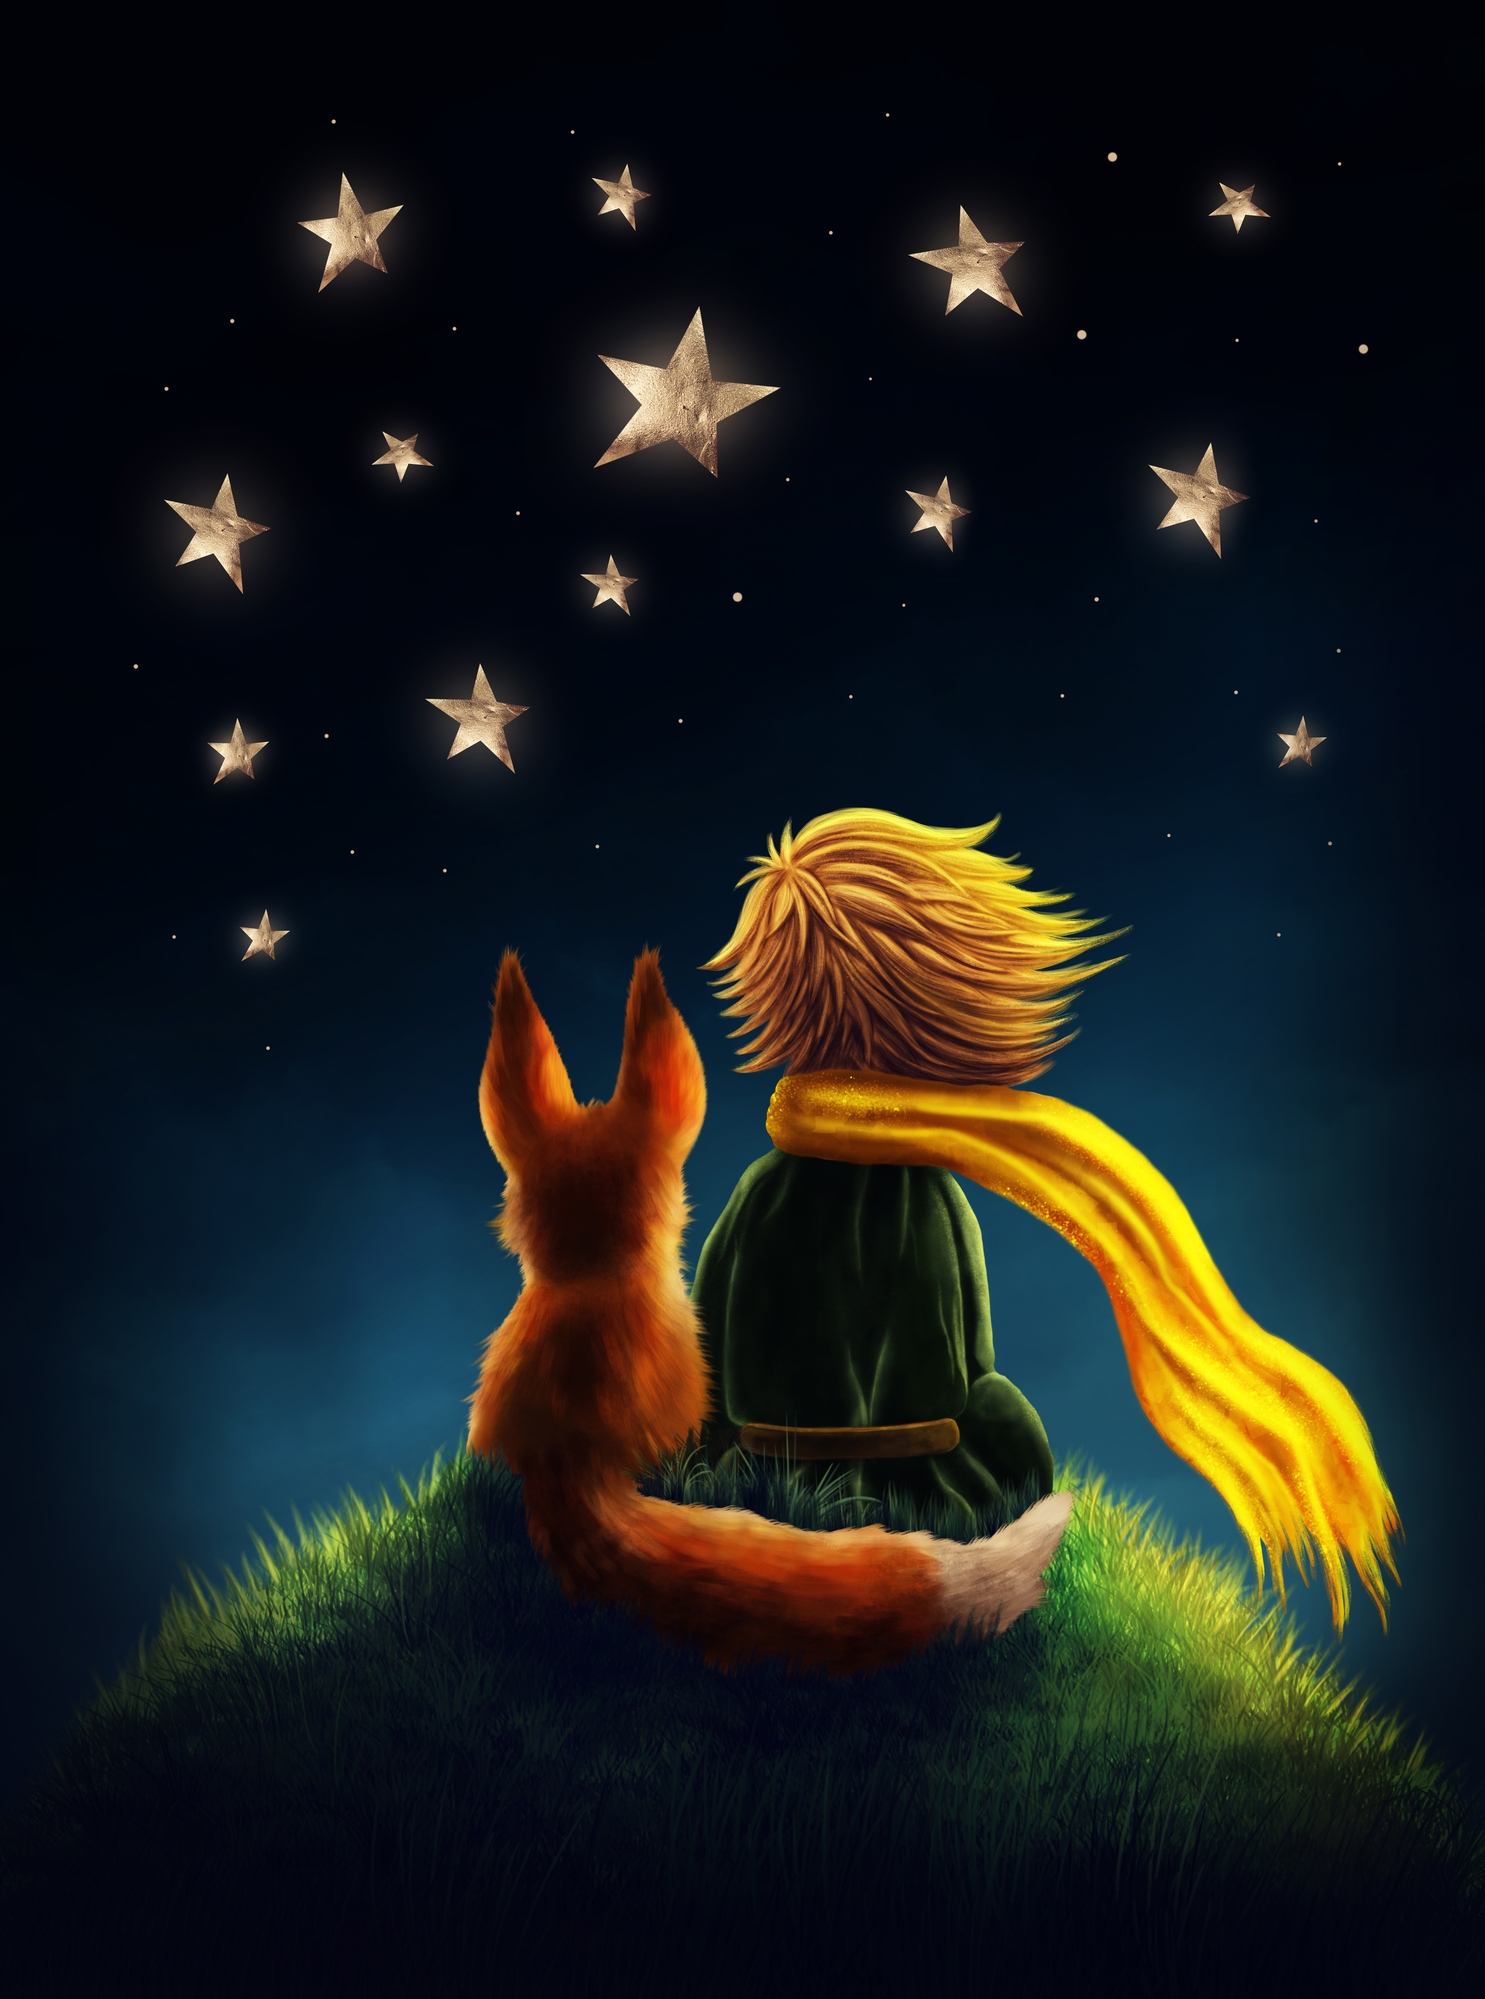 Timeless Lessons From The Little Prince